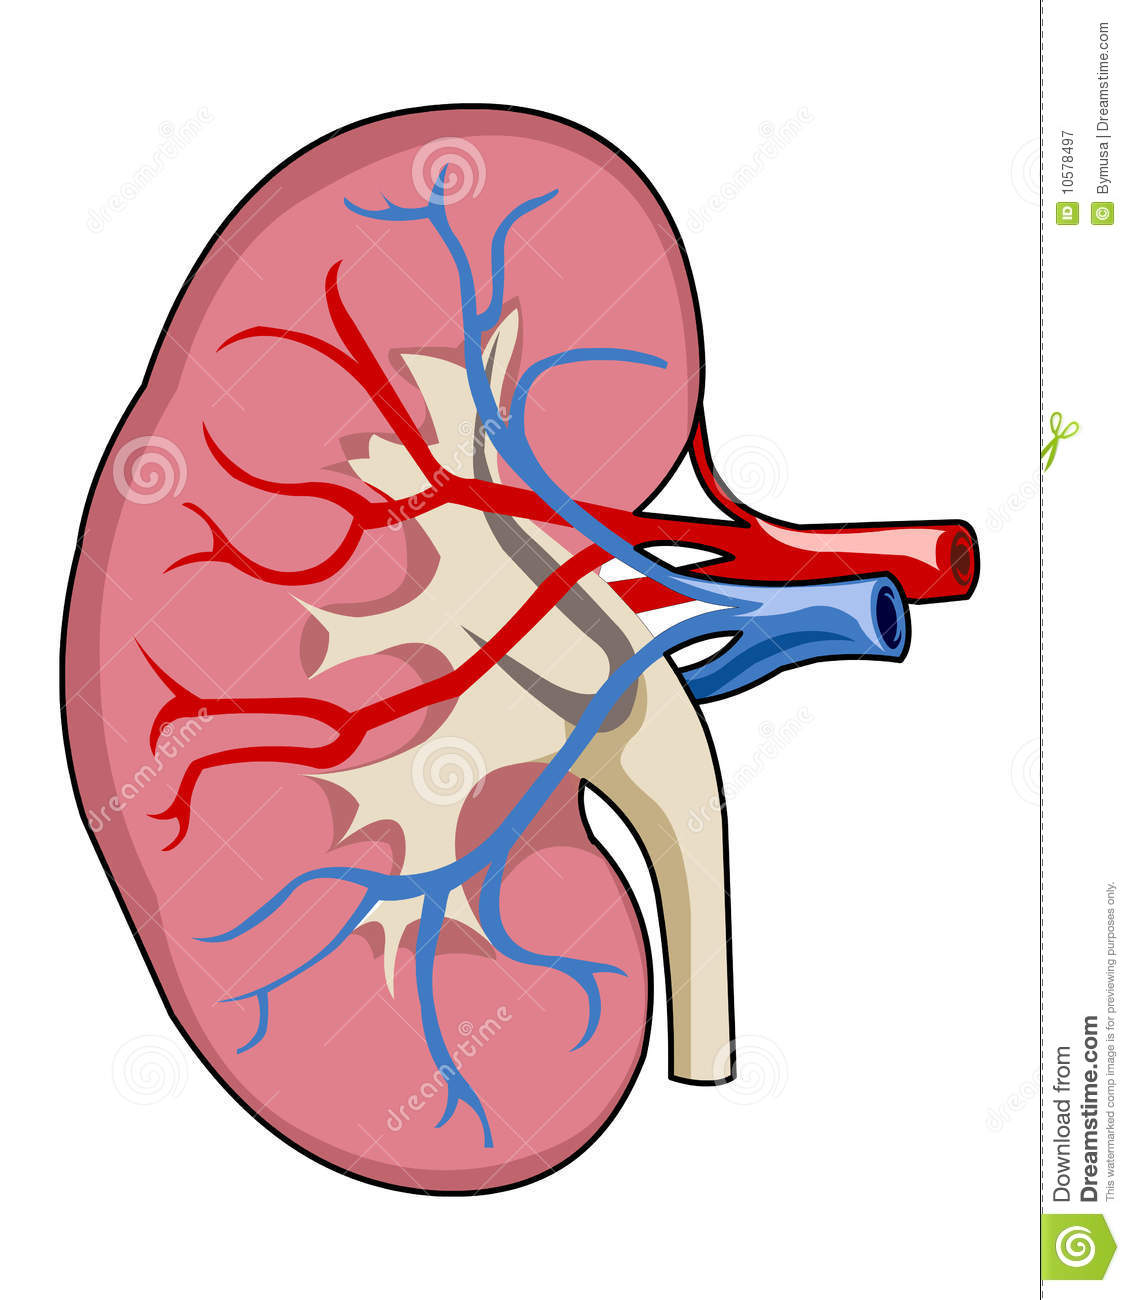 Detailed Of Kidney Illustration Computer Generated On White Background